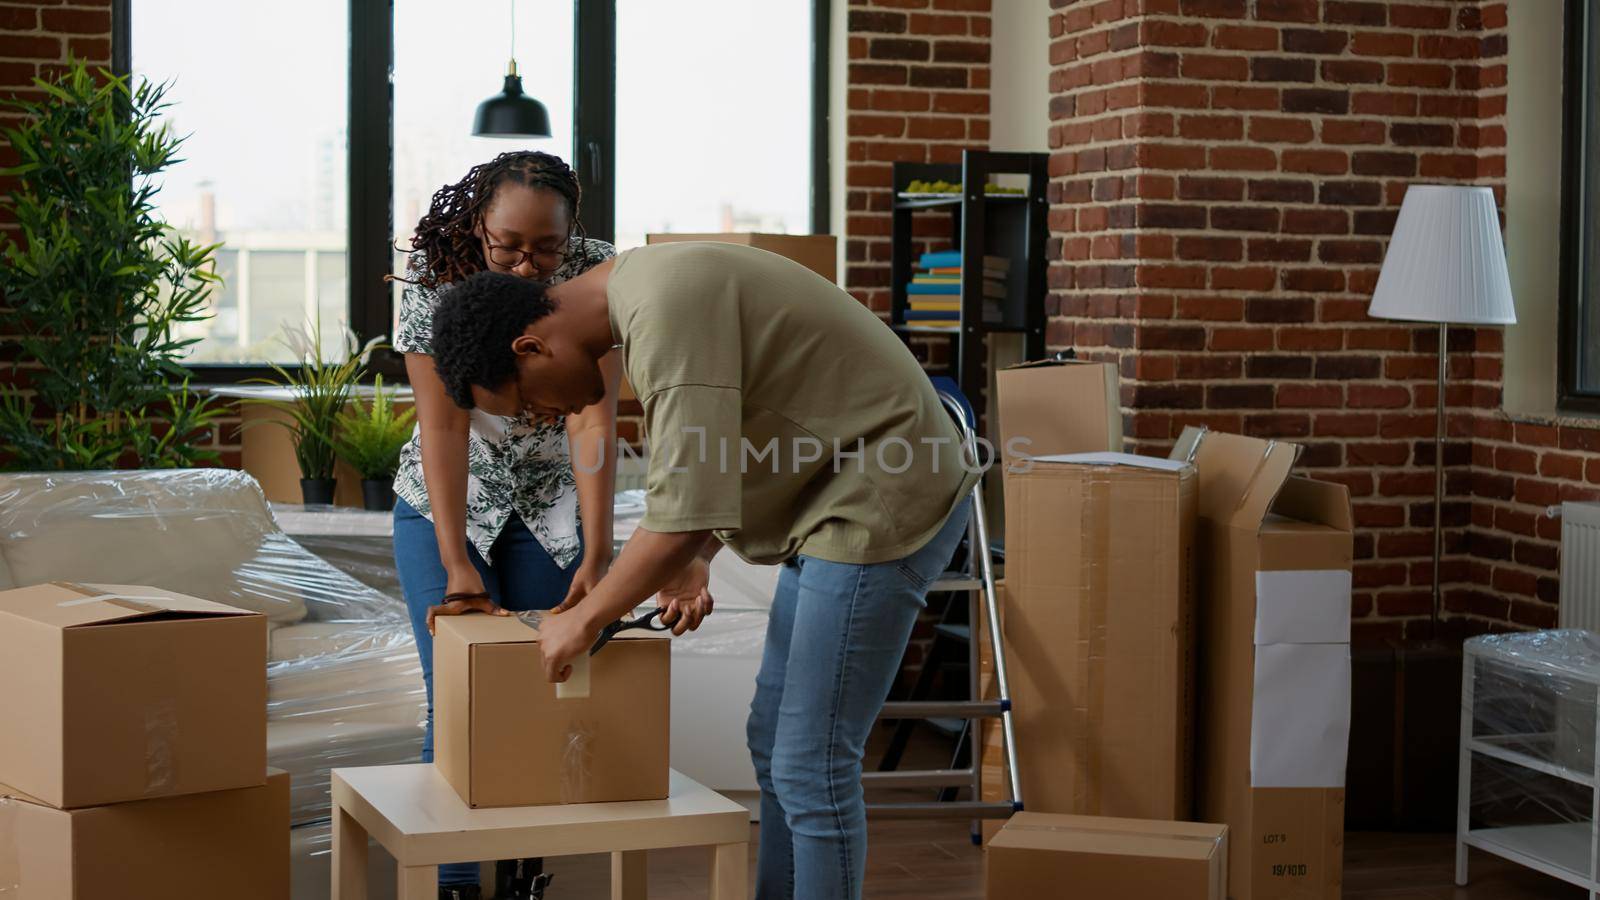 African american couple wrapping cardboard boxes with sticky tape to move in new apartment flat. Packing up furniture and home belongings in packages with adhesive roller for relocation.